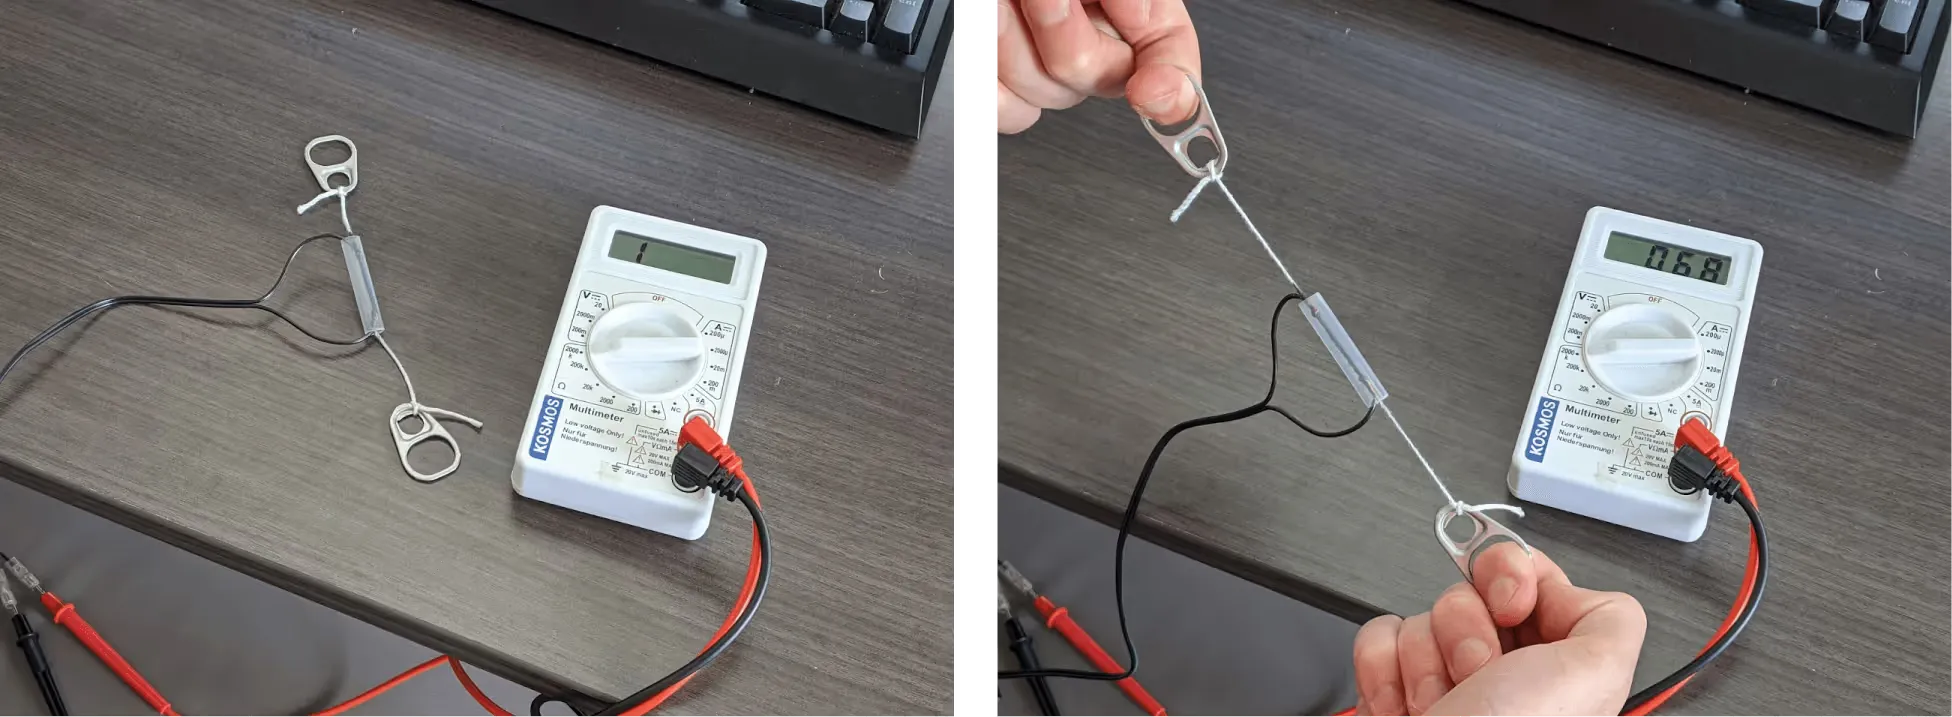 Left: the DIY sensor with a multimeter reading undefined resistance. Right: the same sensor under tension, the multimeter now reads 67 kΩ.